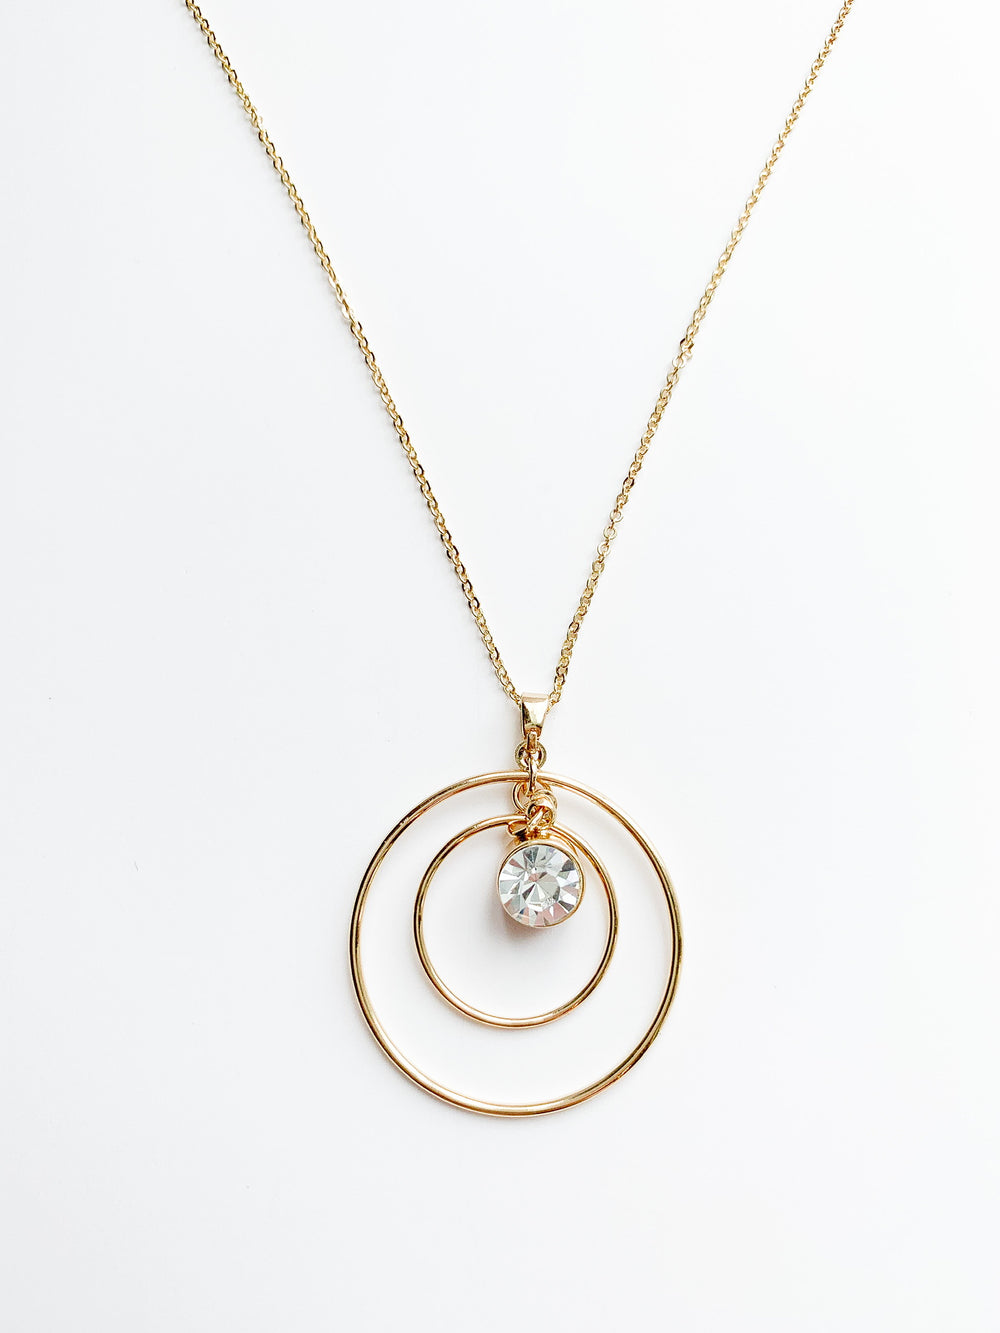 Danielle long gold necklace with 2 halos around a crystal pendent.